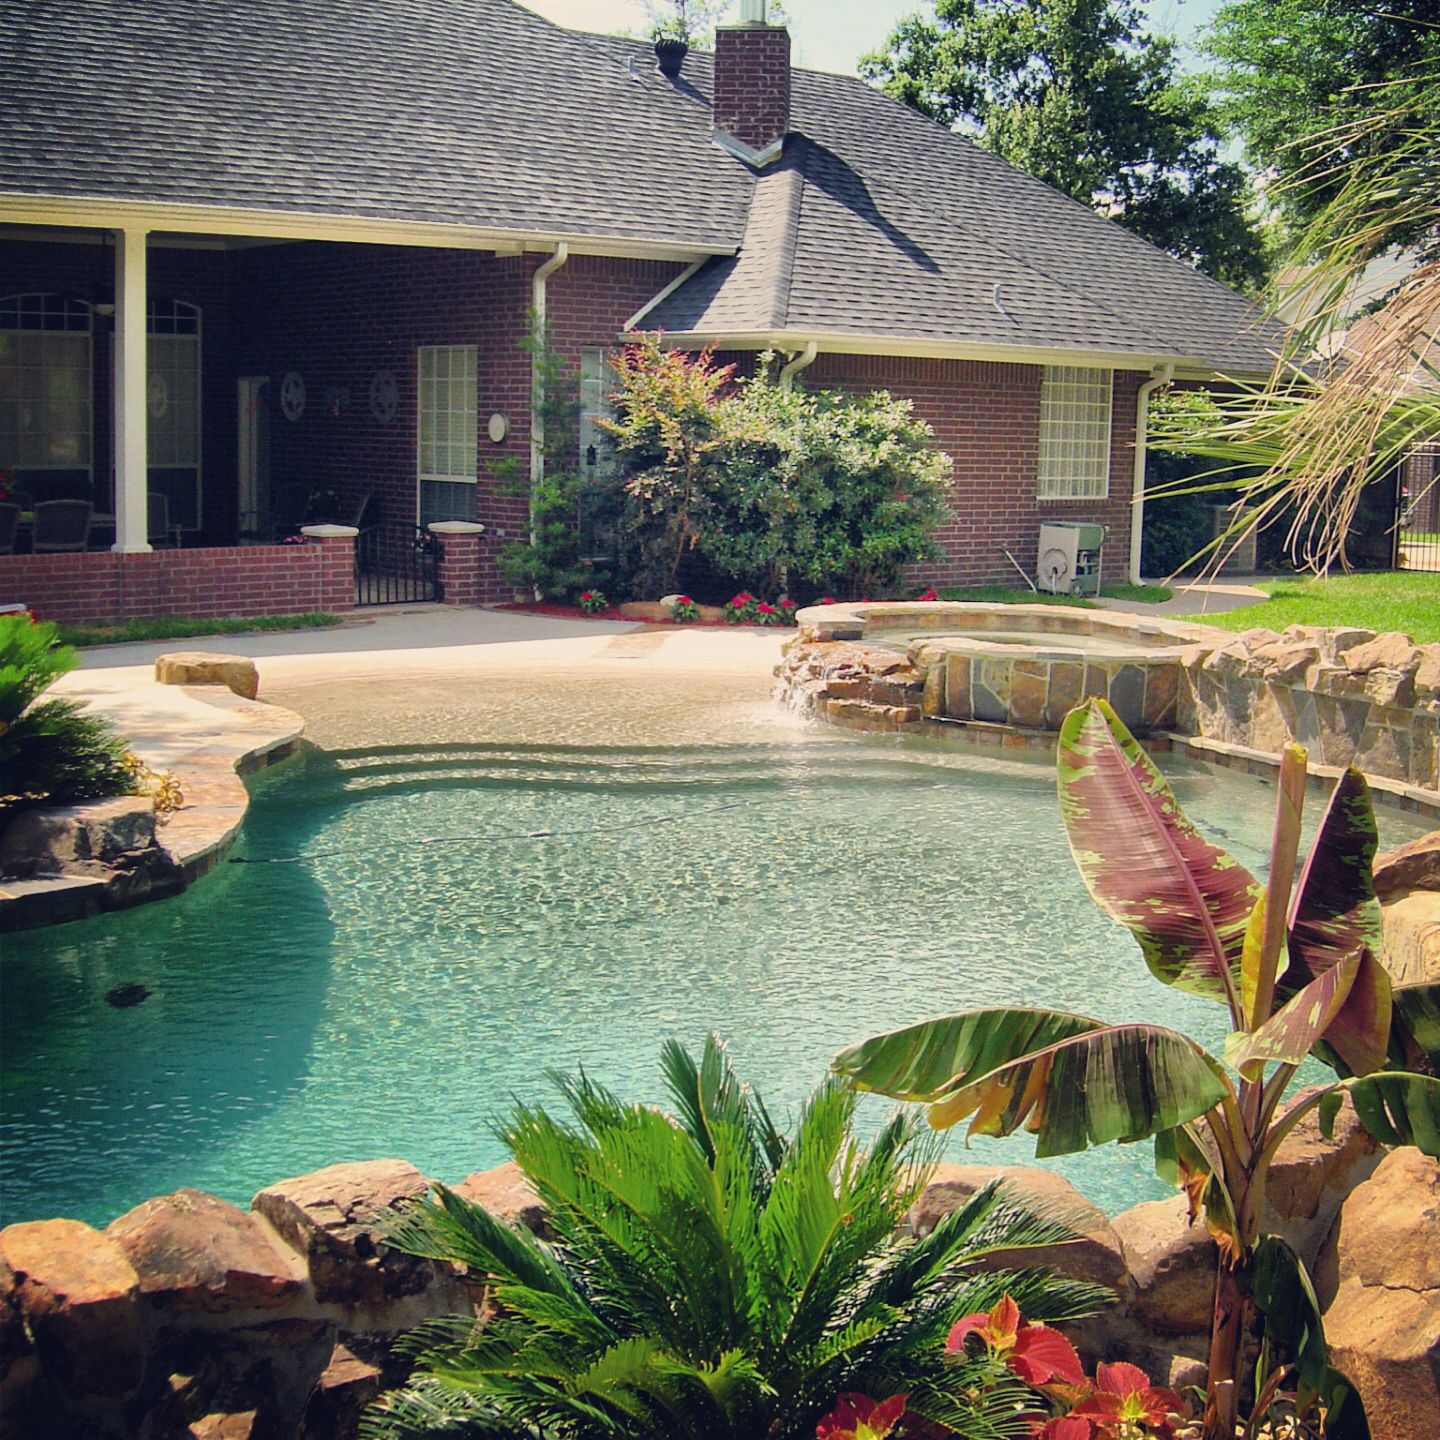 Backyard oasis by Preferred Pools  with boulder stone coping and spa ...